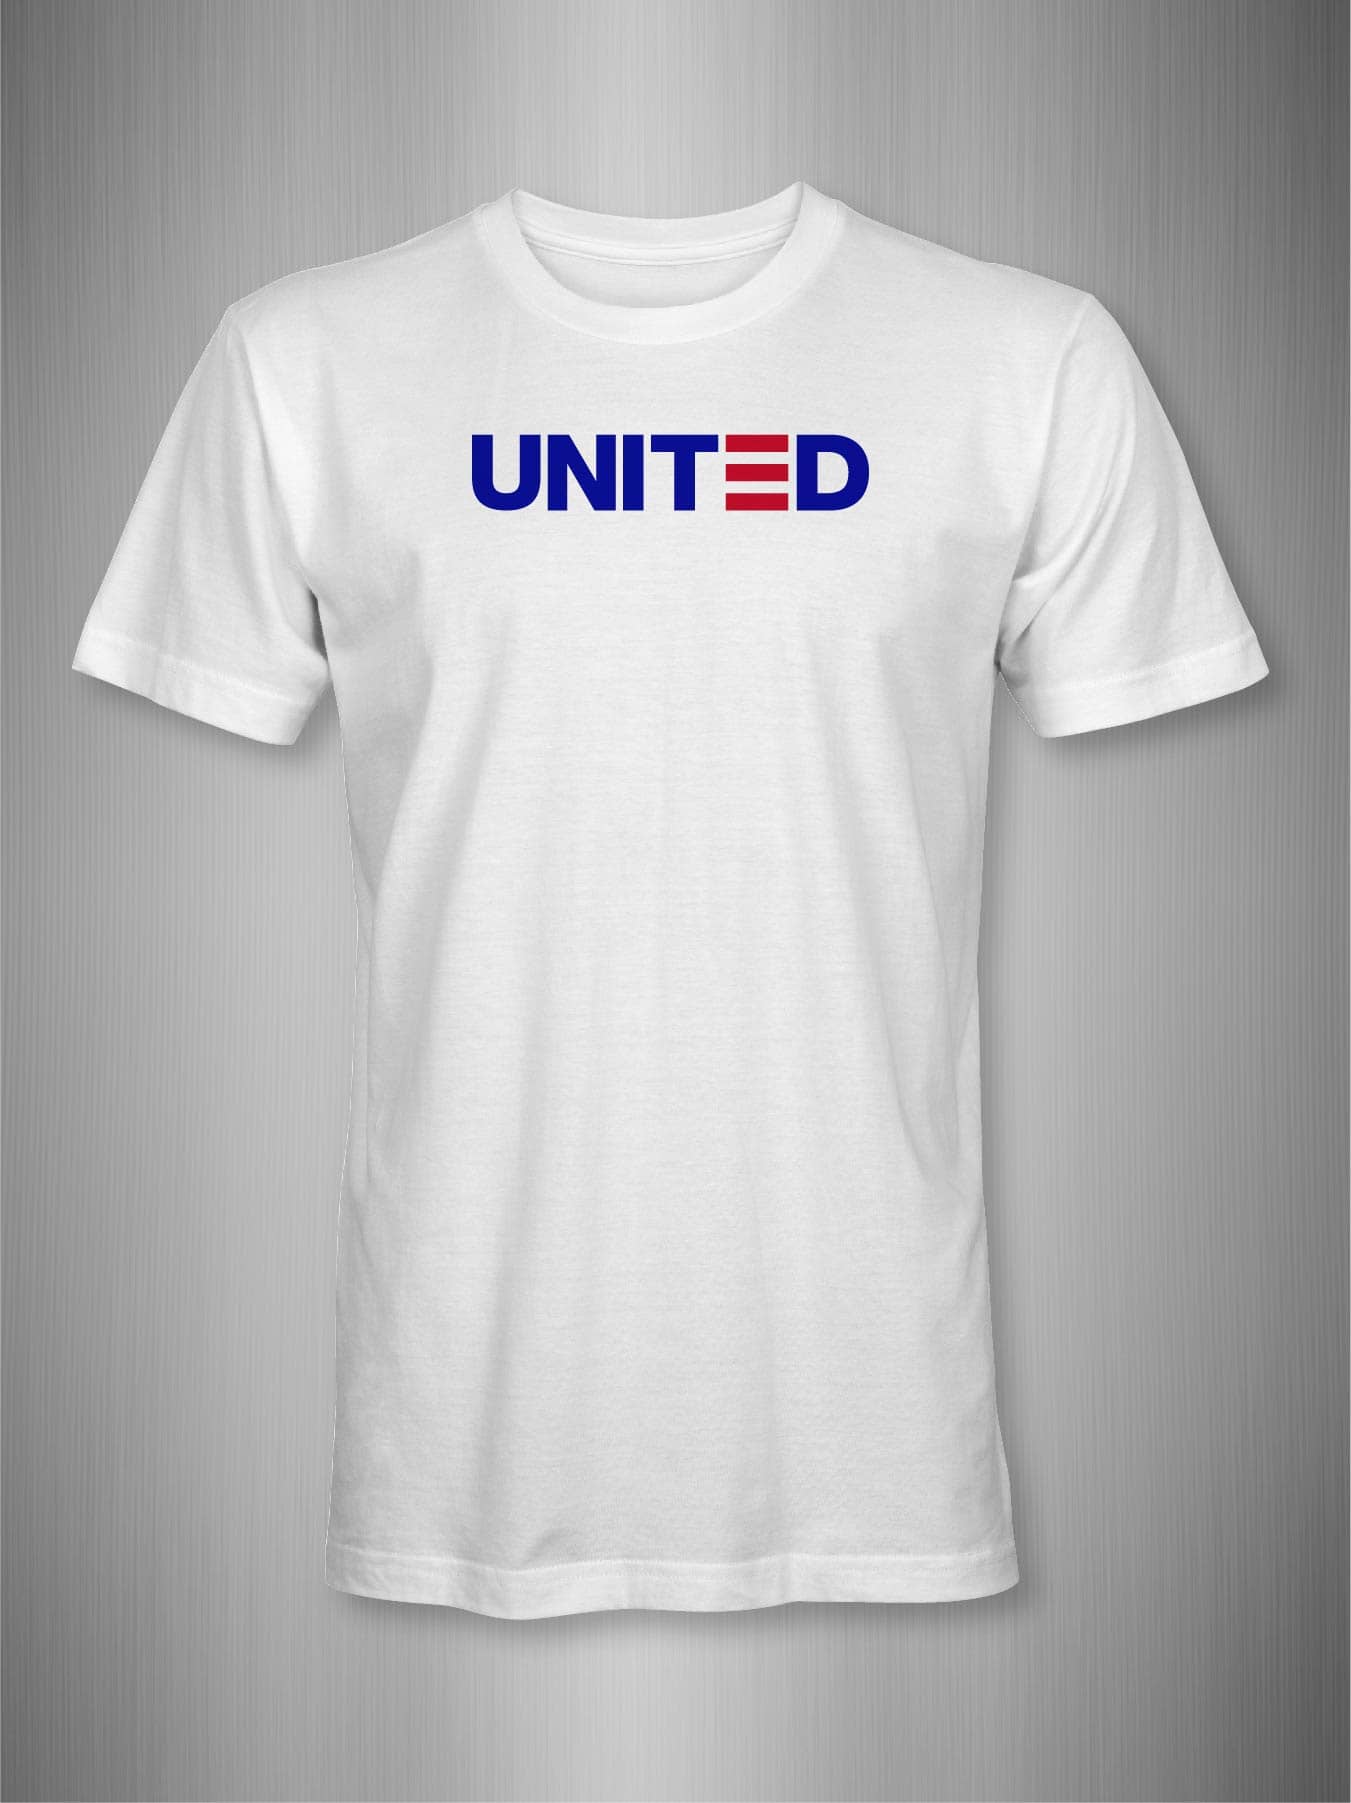 UNITED (Can Be Customized)